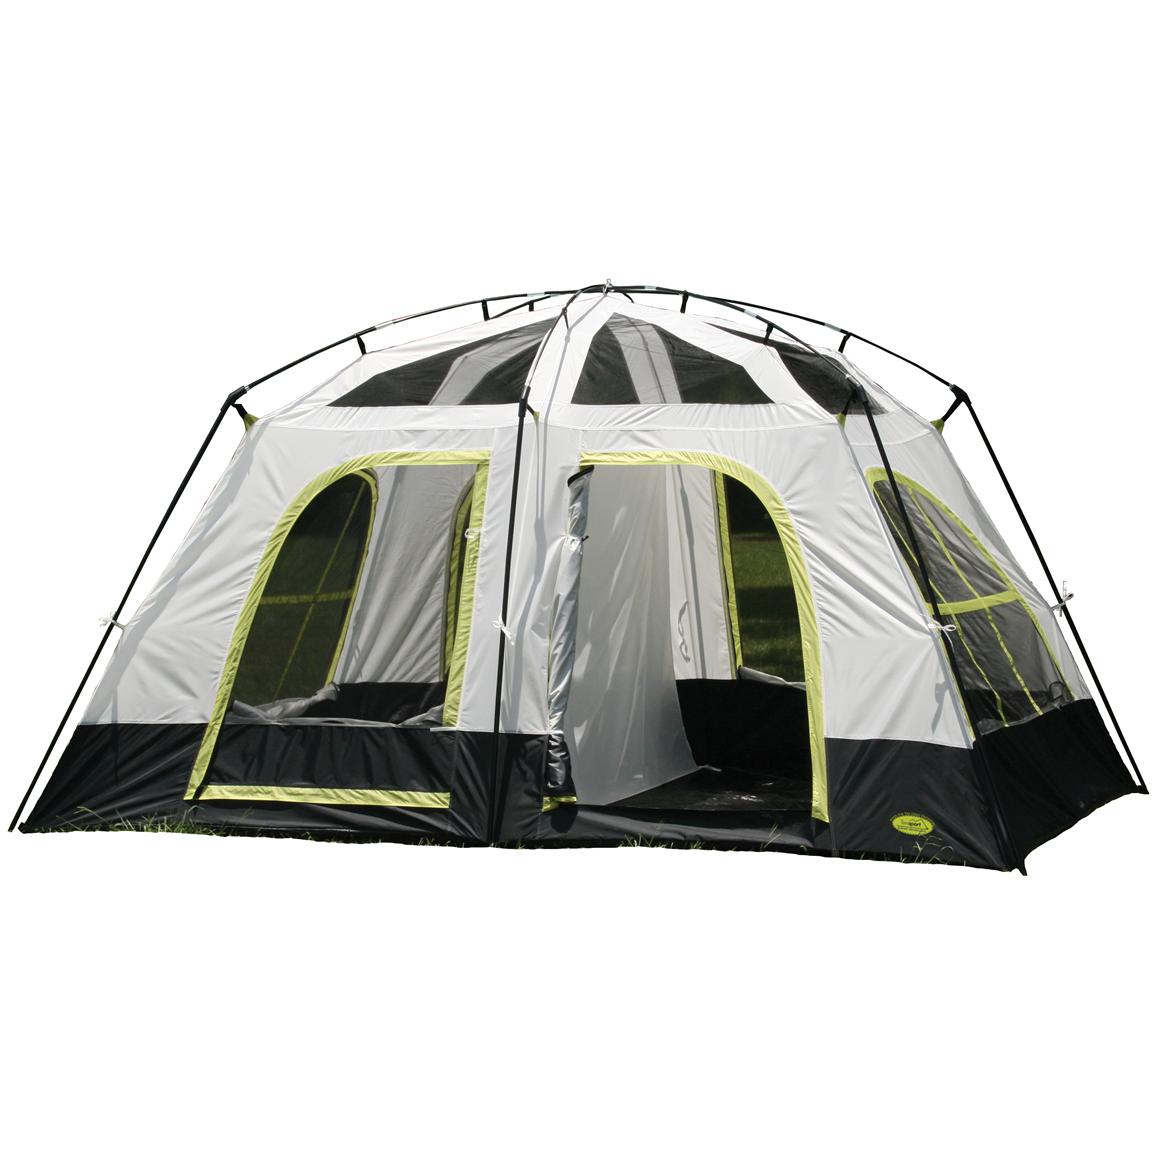 Texsport® Wild River 2 room Cabin Tent 293800, Cabin Tents at Sportsman's Guide